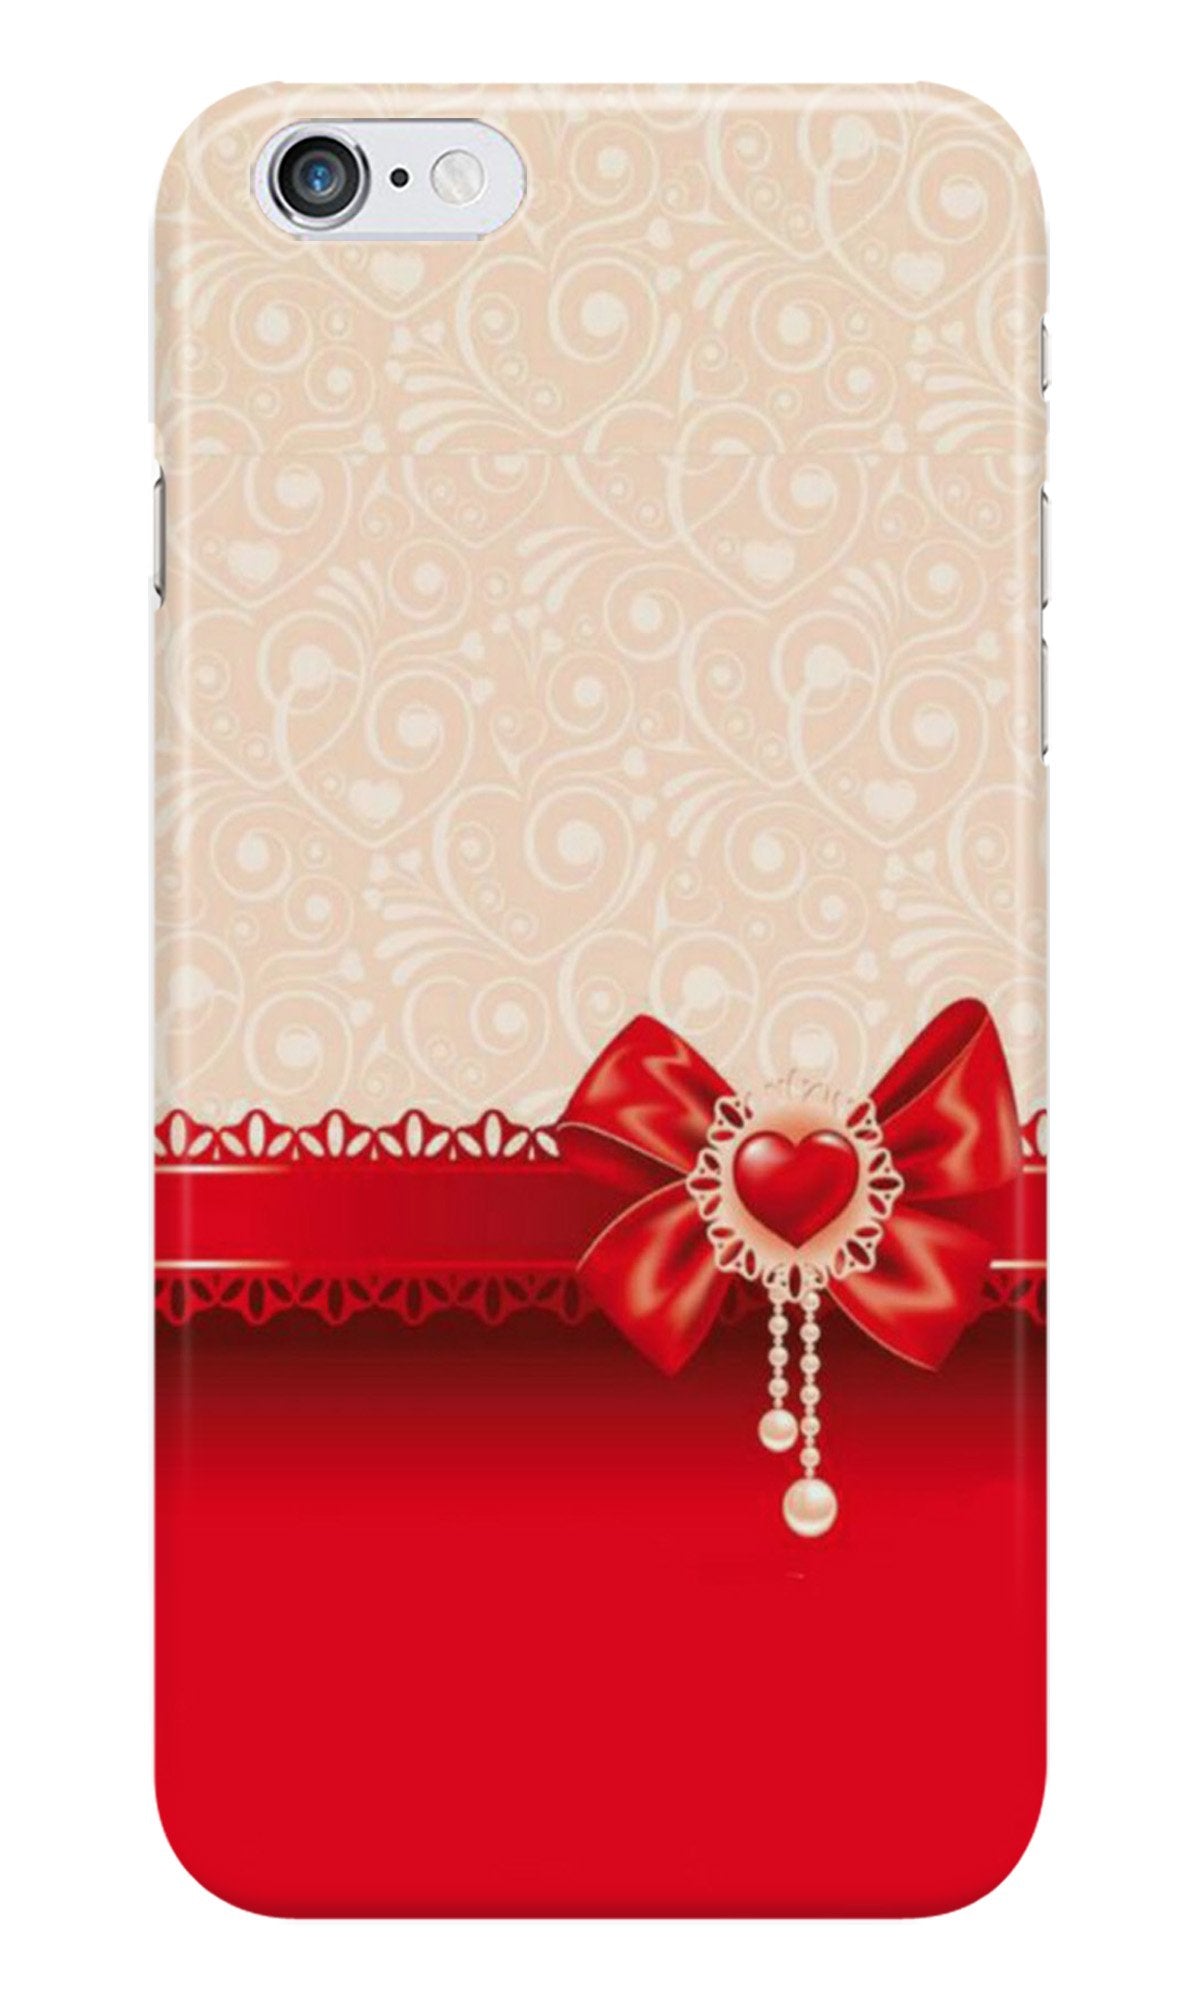 Gift Wrap3 Case for iPhone 6 Plus/ 6s Plus